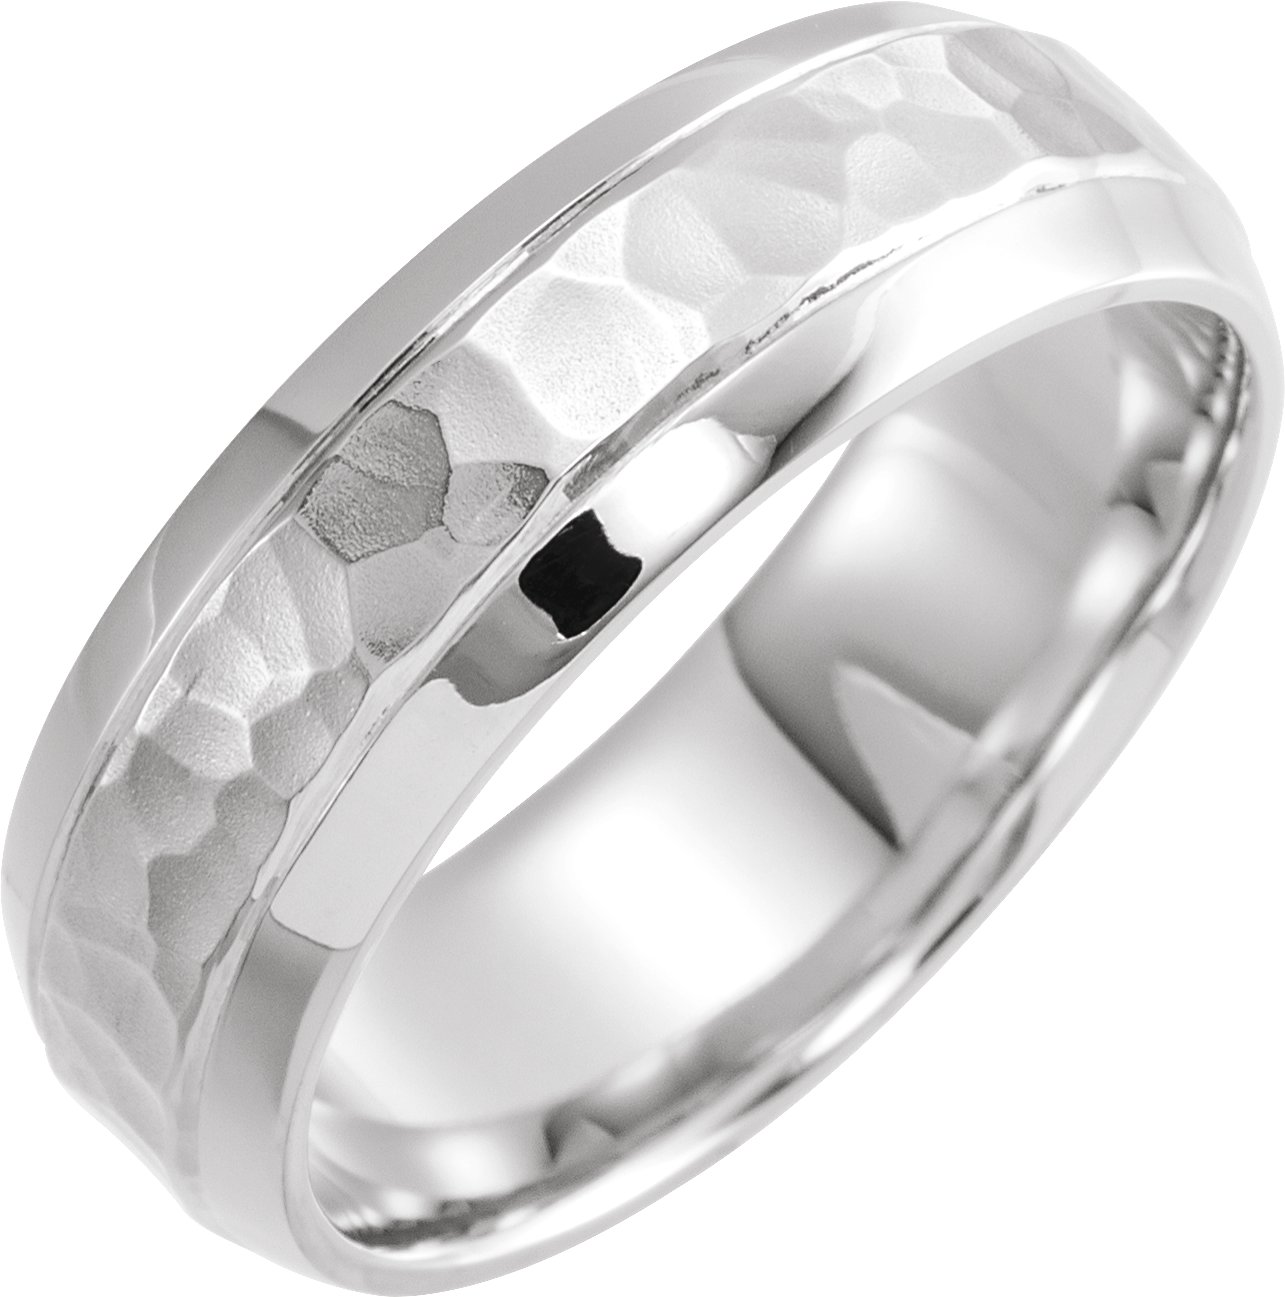 14K White 7 mm Beveled-Edge Band with Hammered Texture Size 9.5